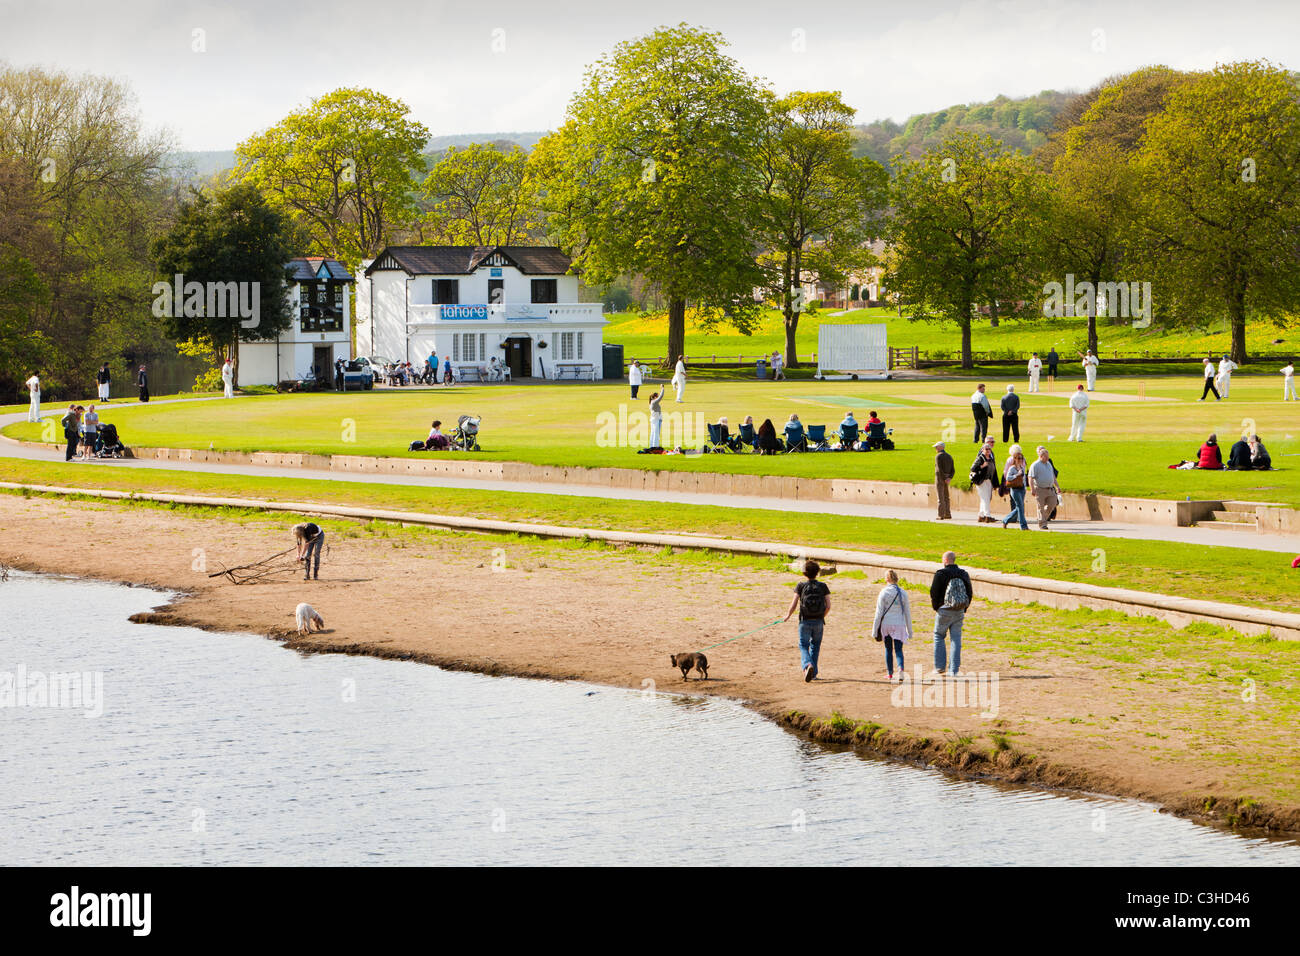 A cricket match in Roberts Park, Saltaire, UK. Stock Photo